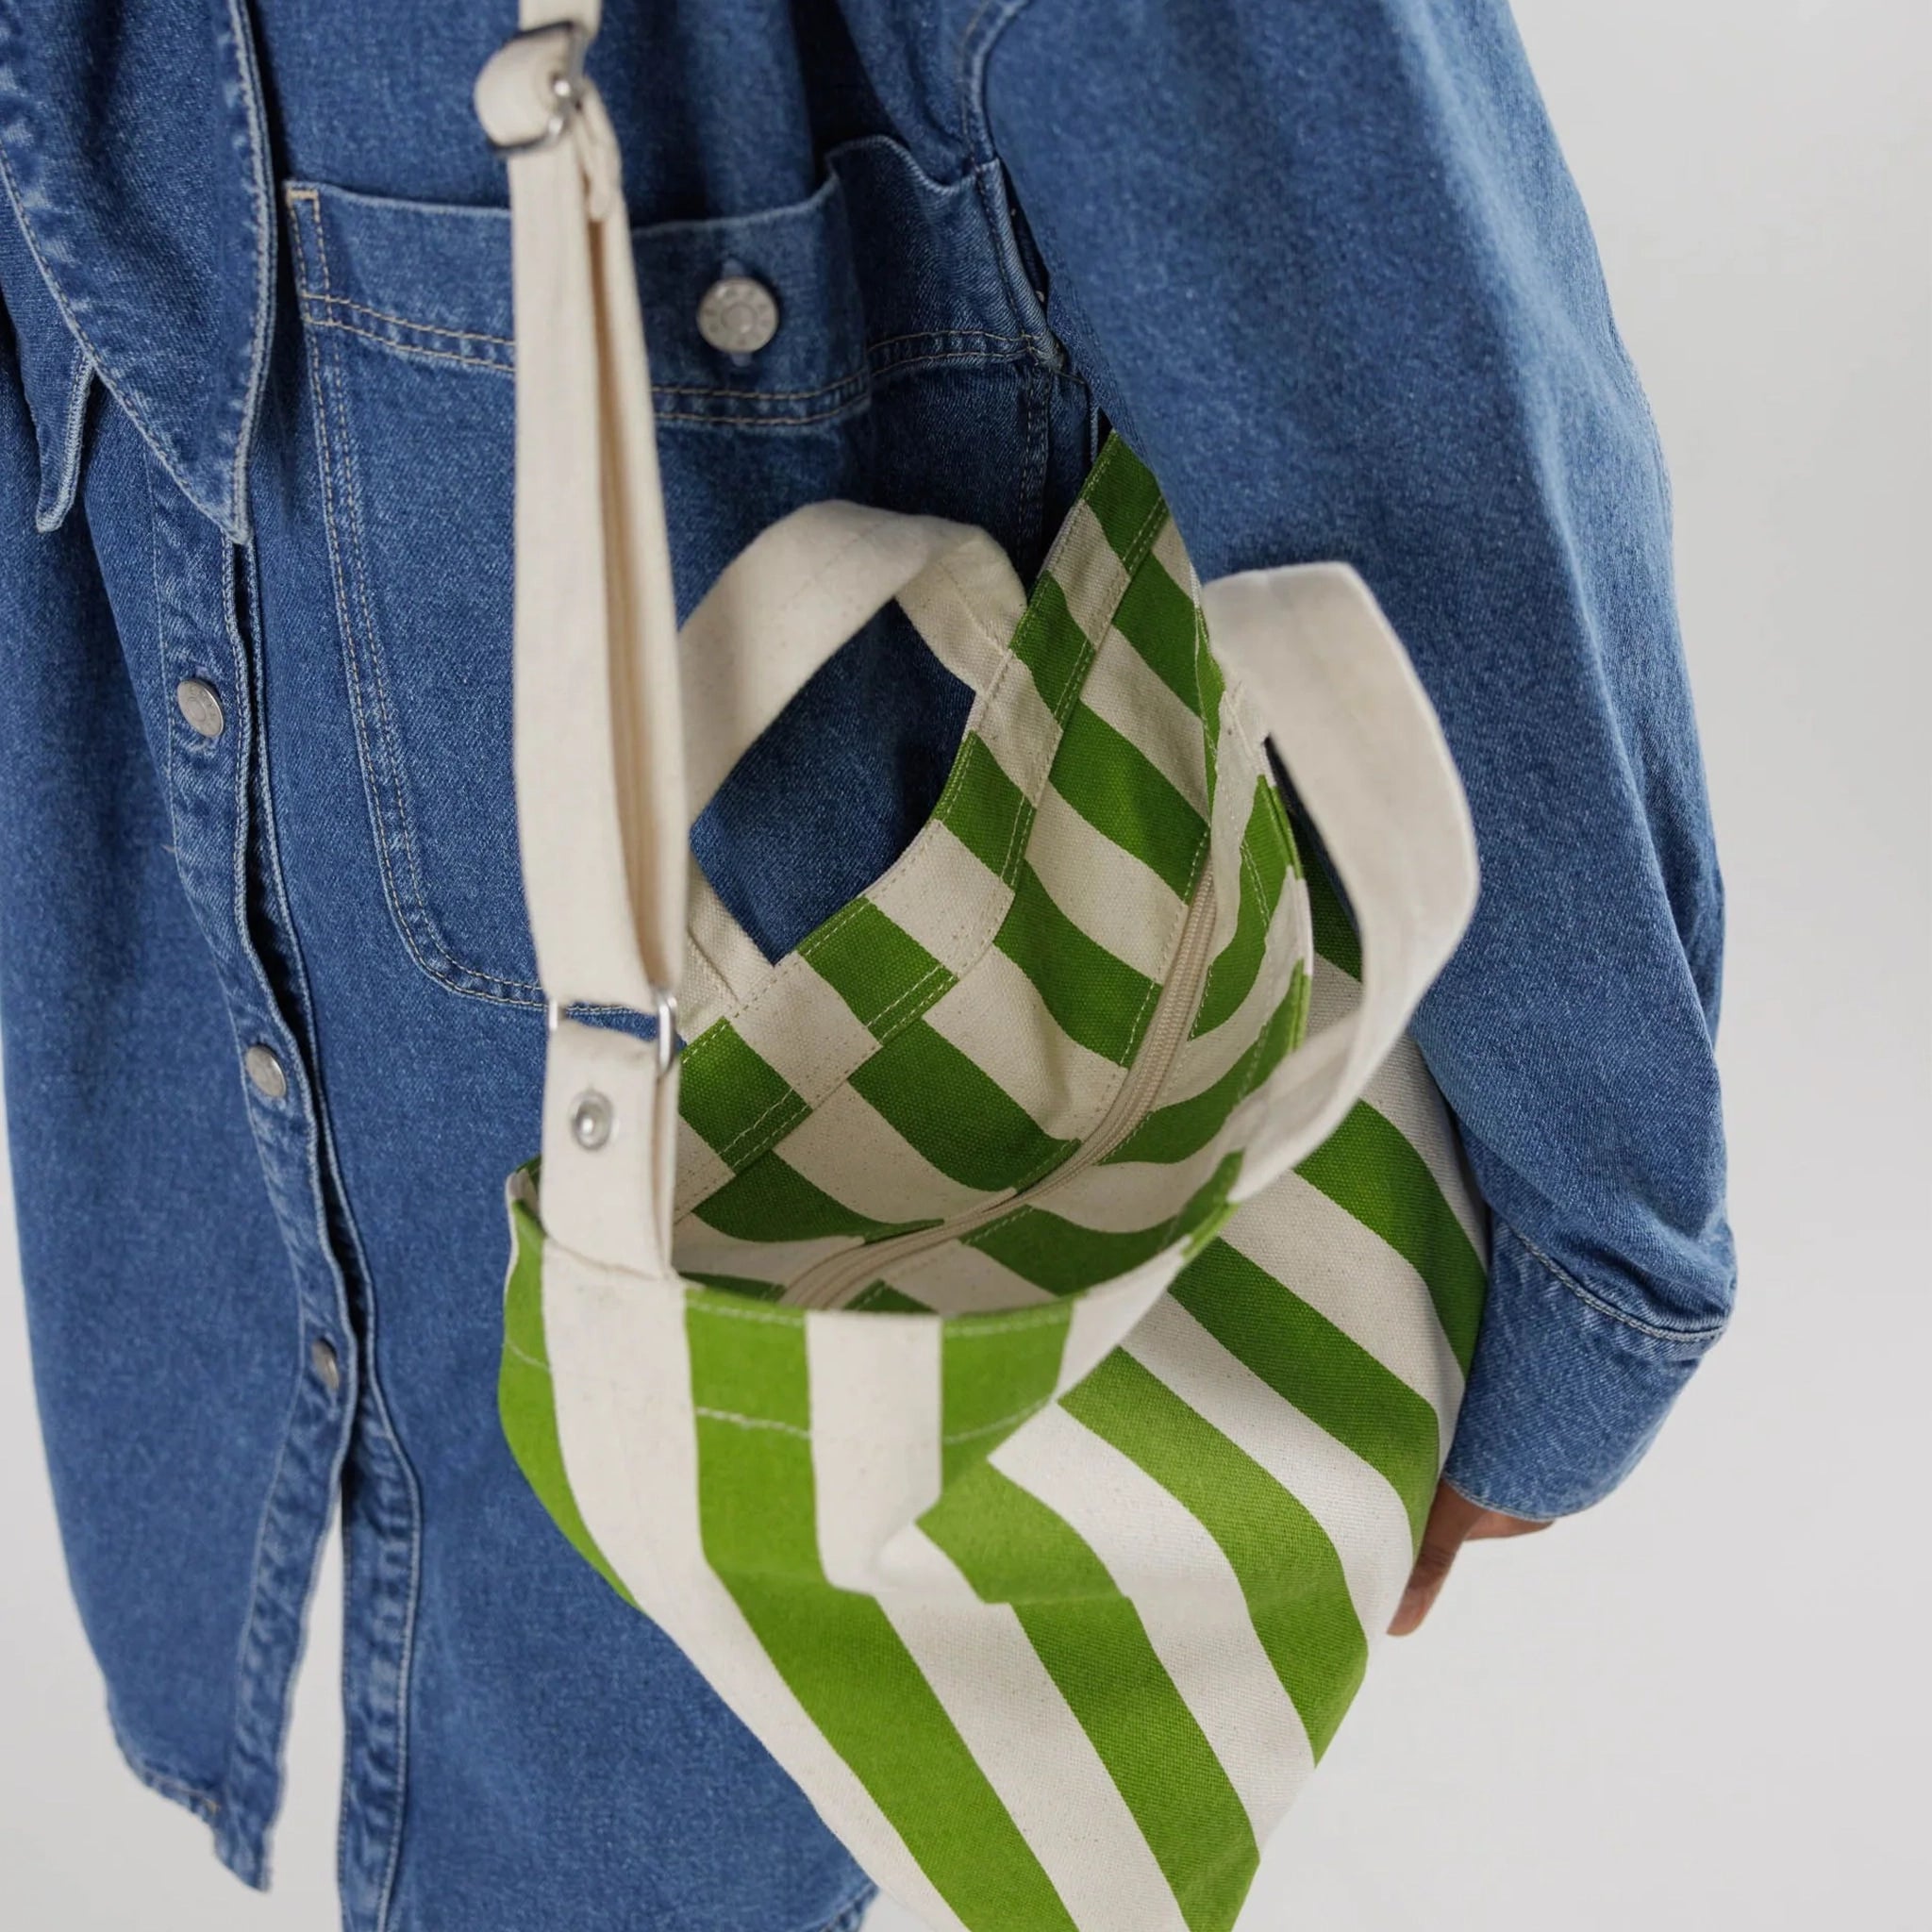 On a white background is a green and white canvas tote bag with two hand straps and one larger over the shoulder option.